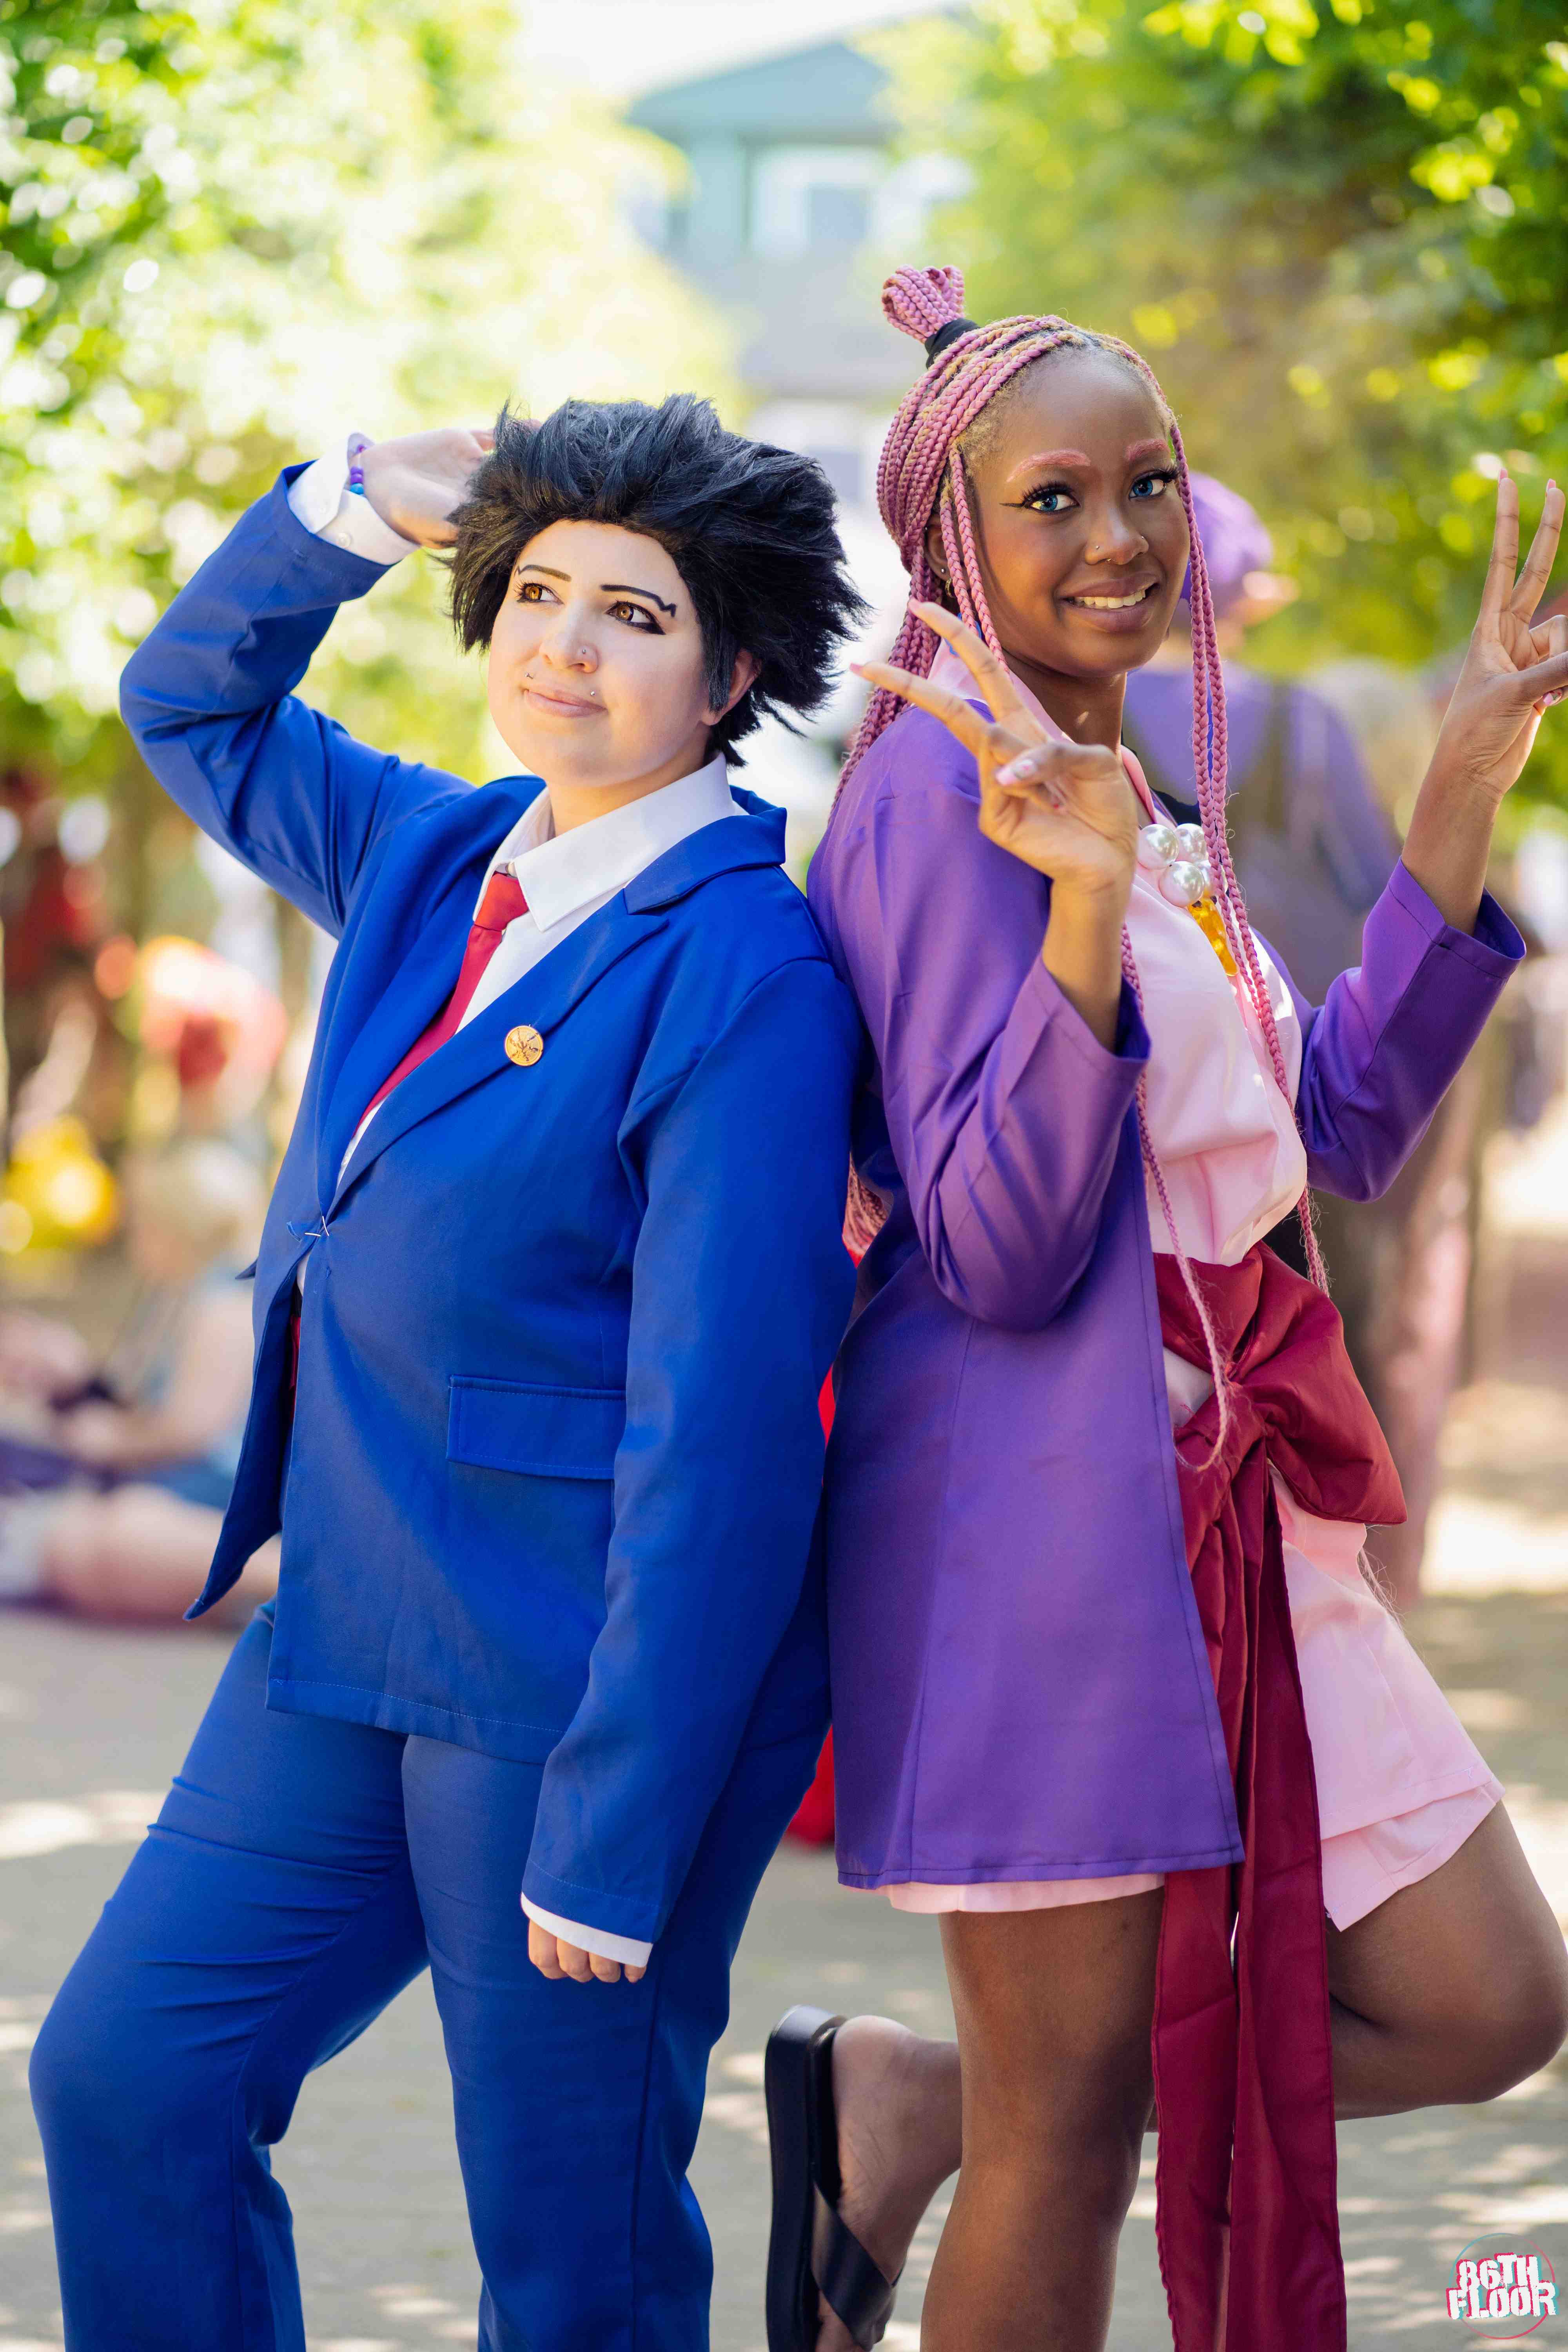 Phoenix Wright and Maya Fey - Ace Attorney - London MCM Comic Con 2023 - 86th Floor Cosplay and Cons